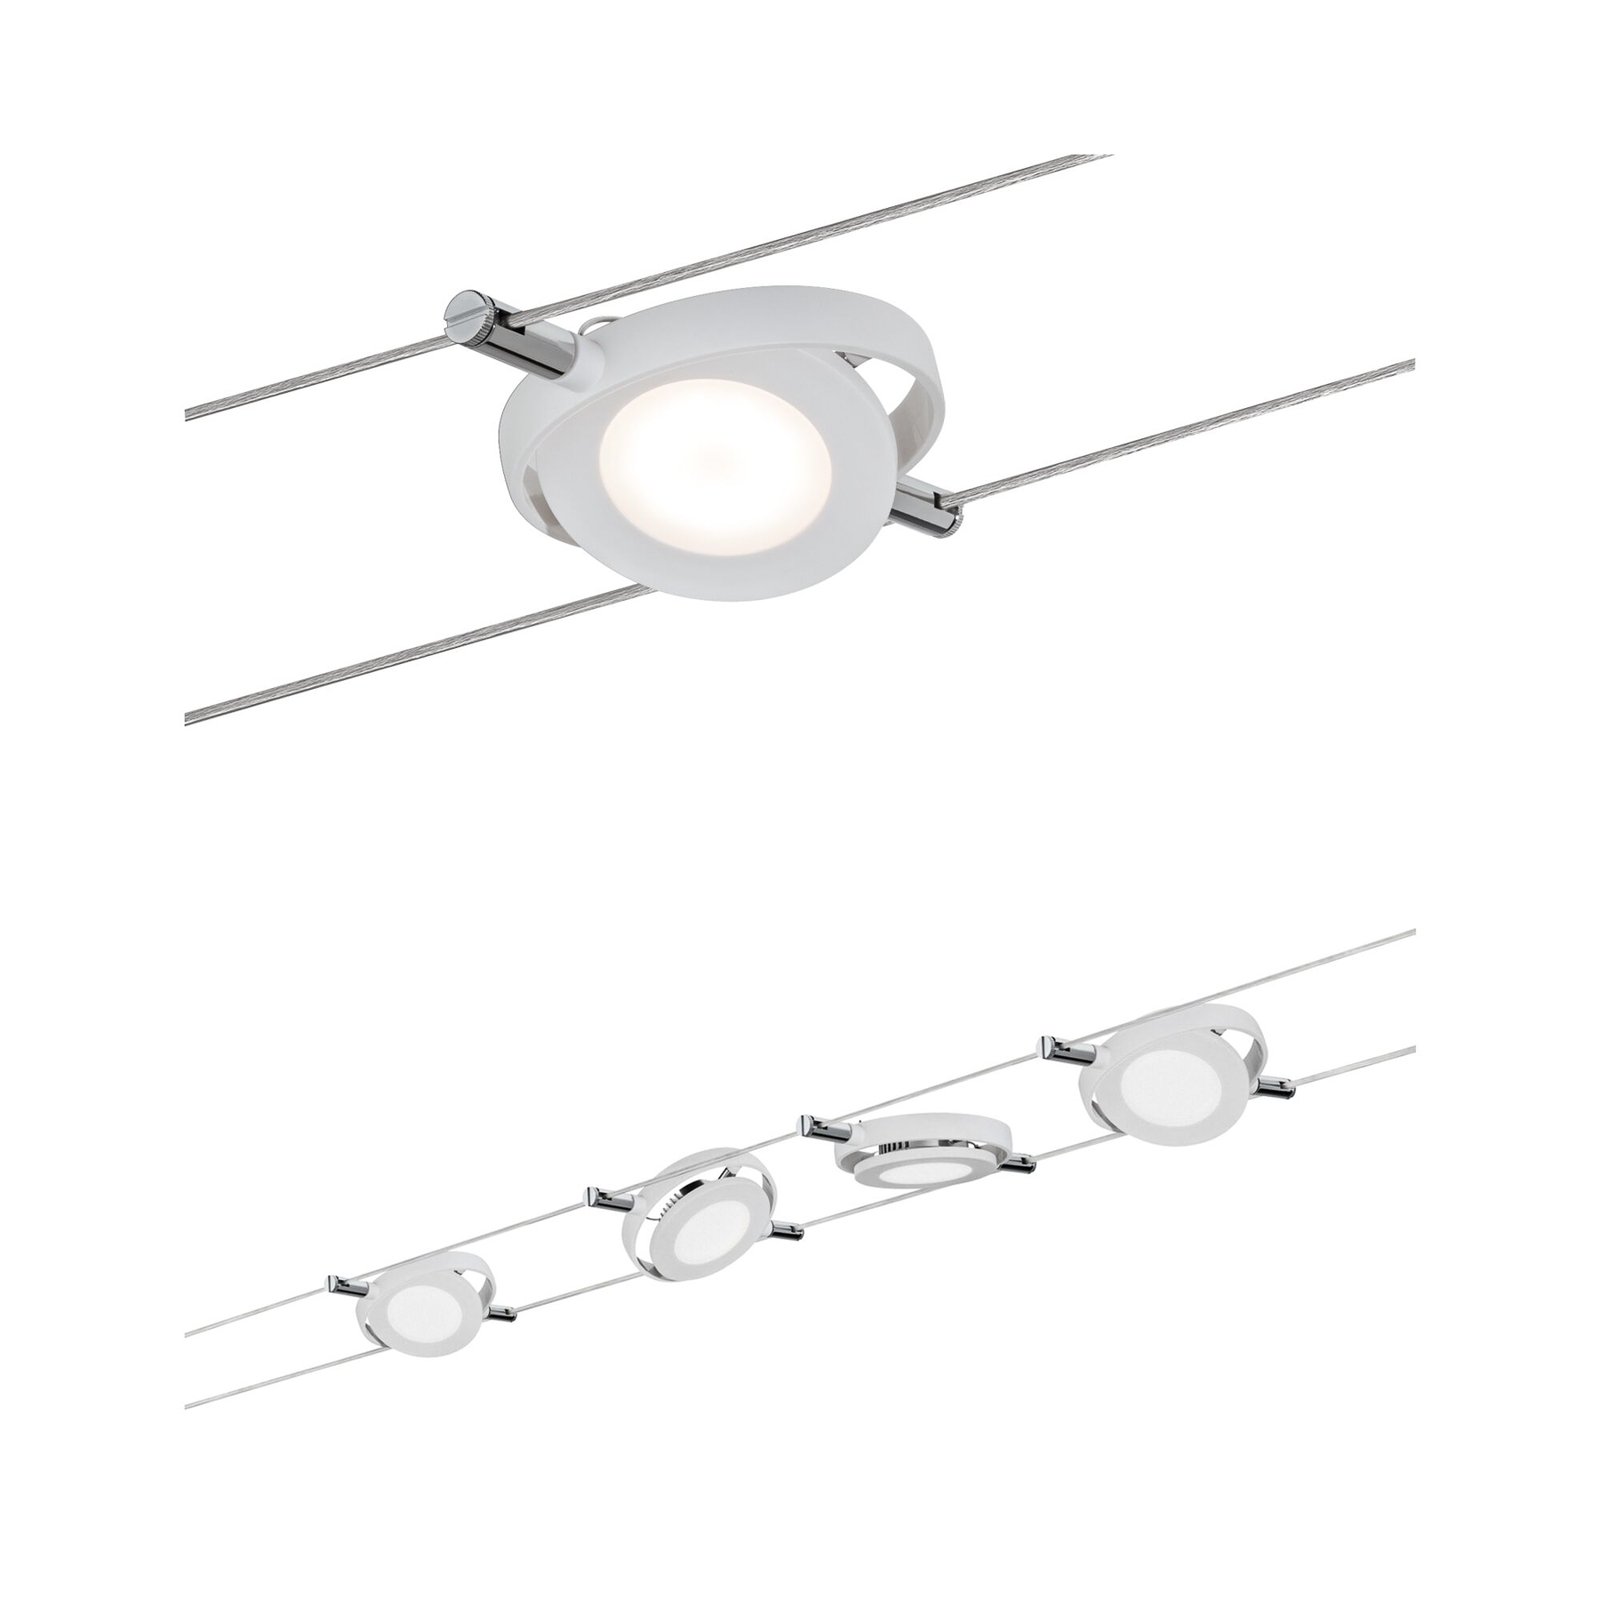 Cable lighting system MacRound with four lights